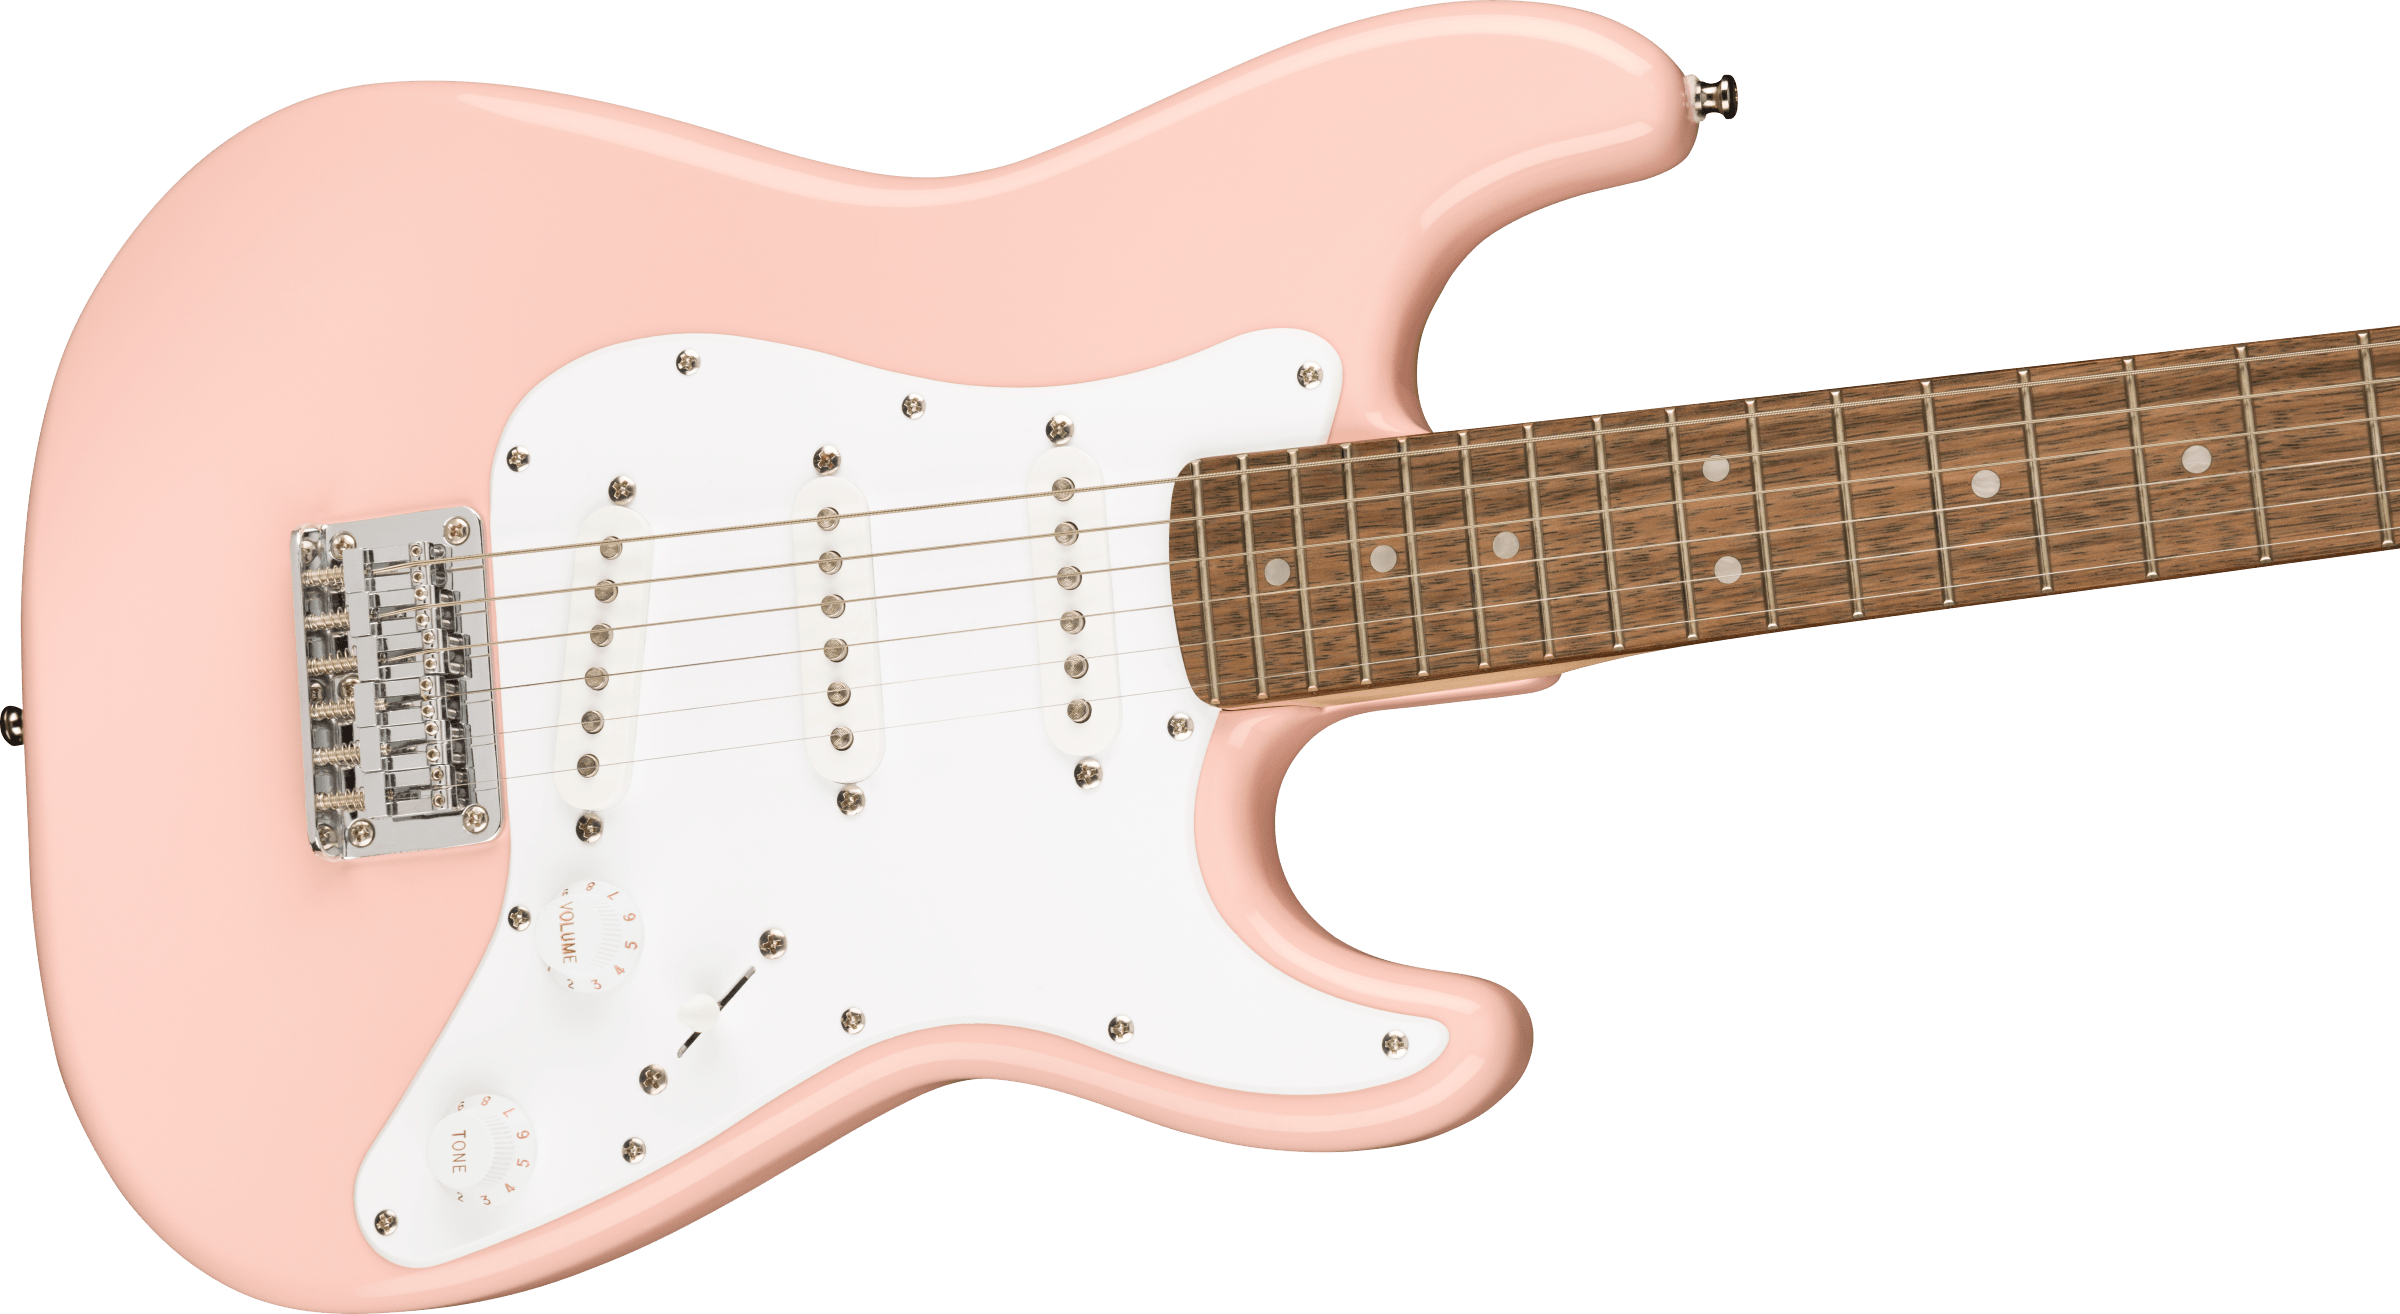 Squier Squier Mini Strat V2 Ht Sss Lau - Shell Pink - Electric guitar for kids - Variation 3